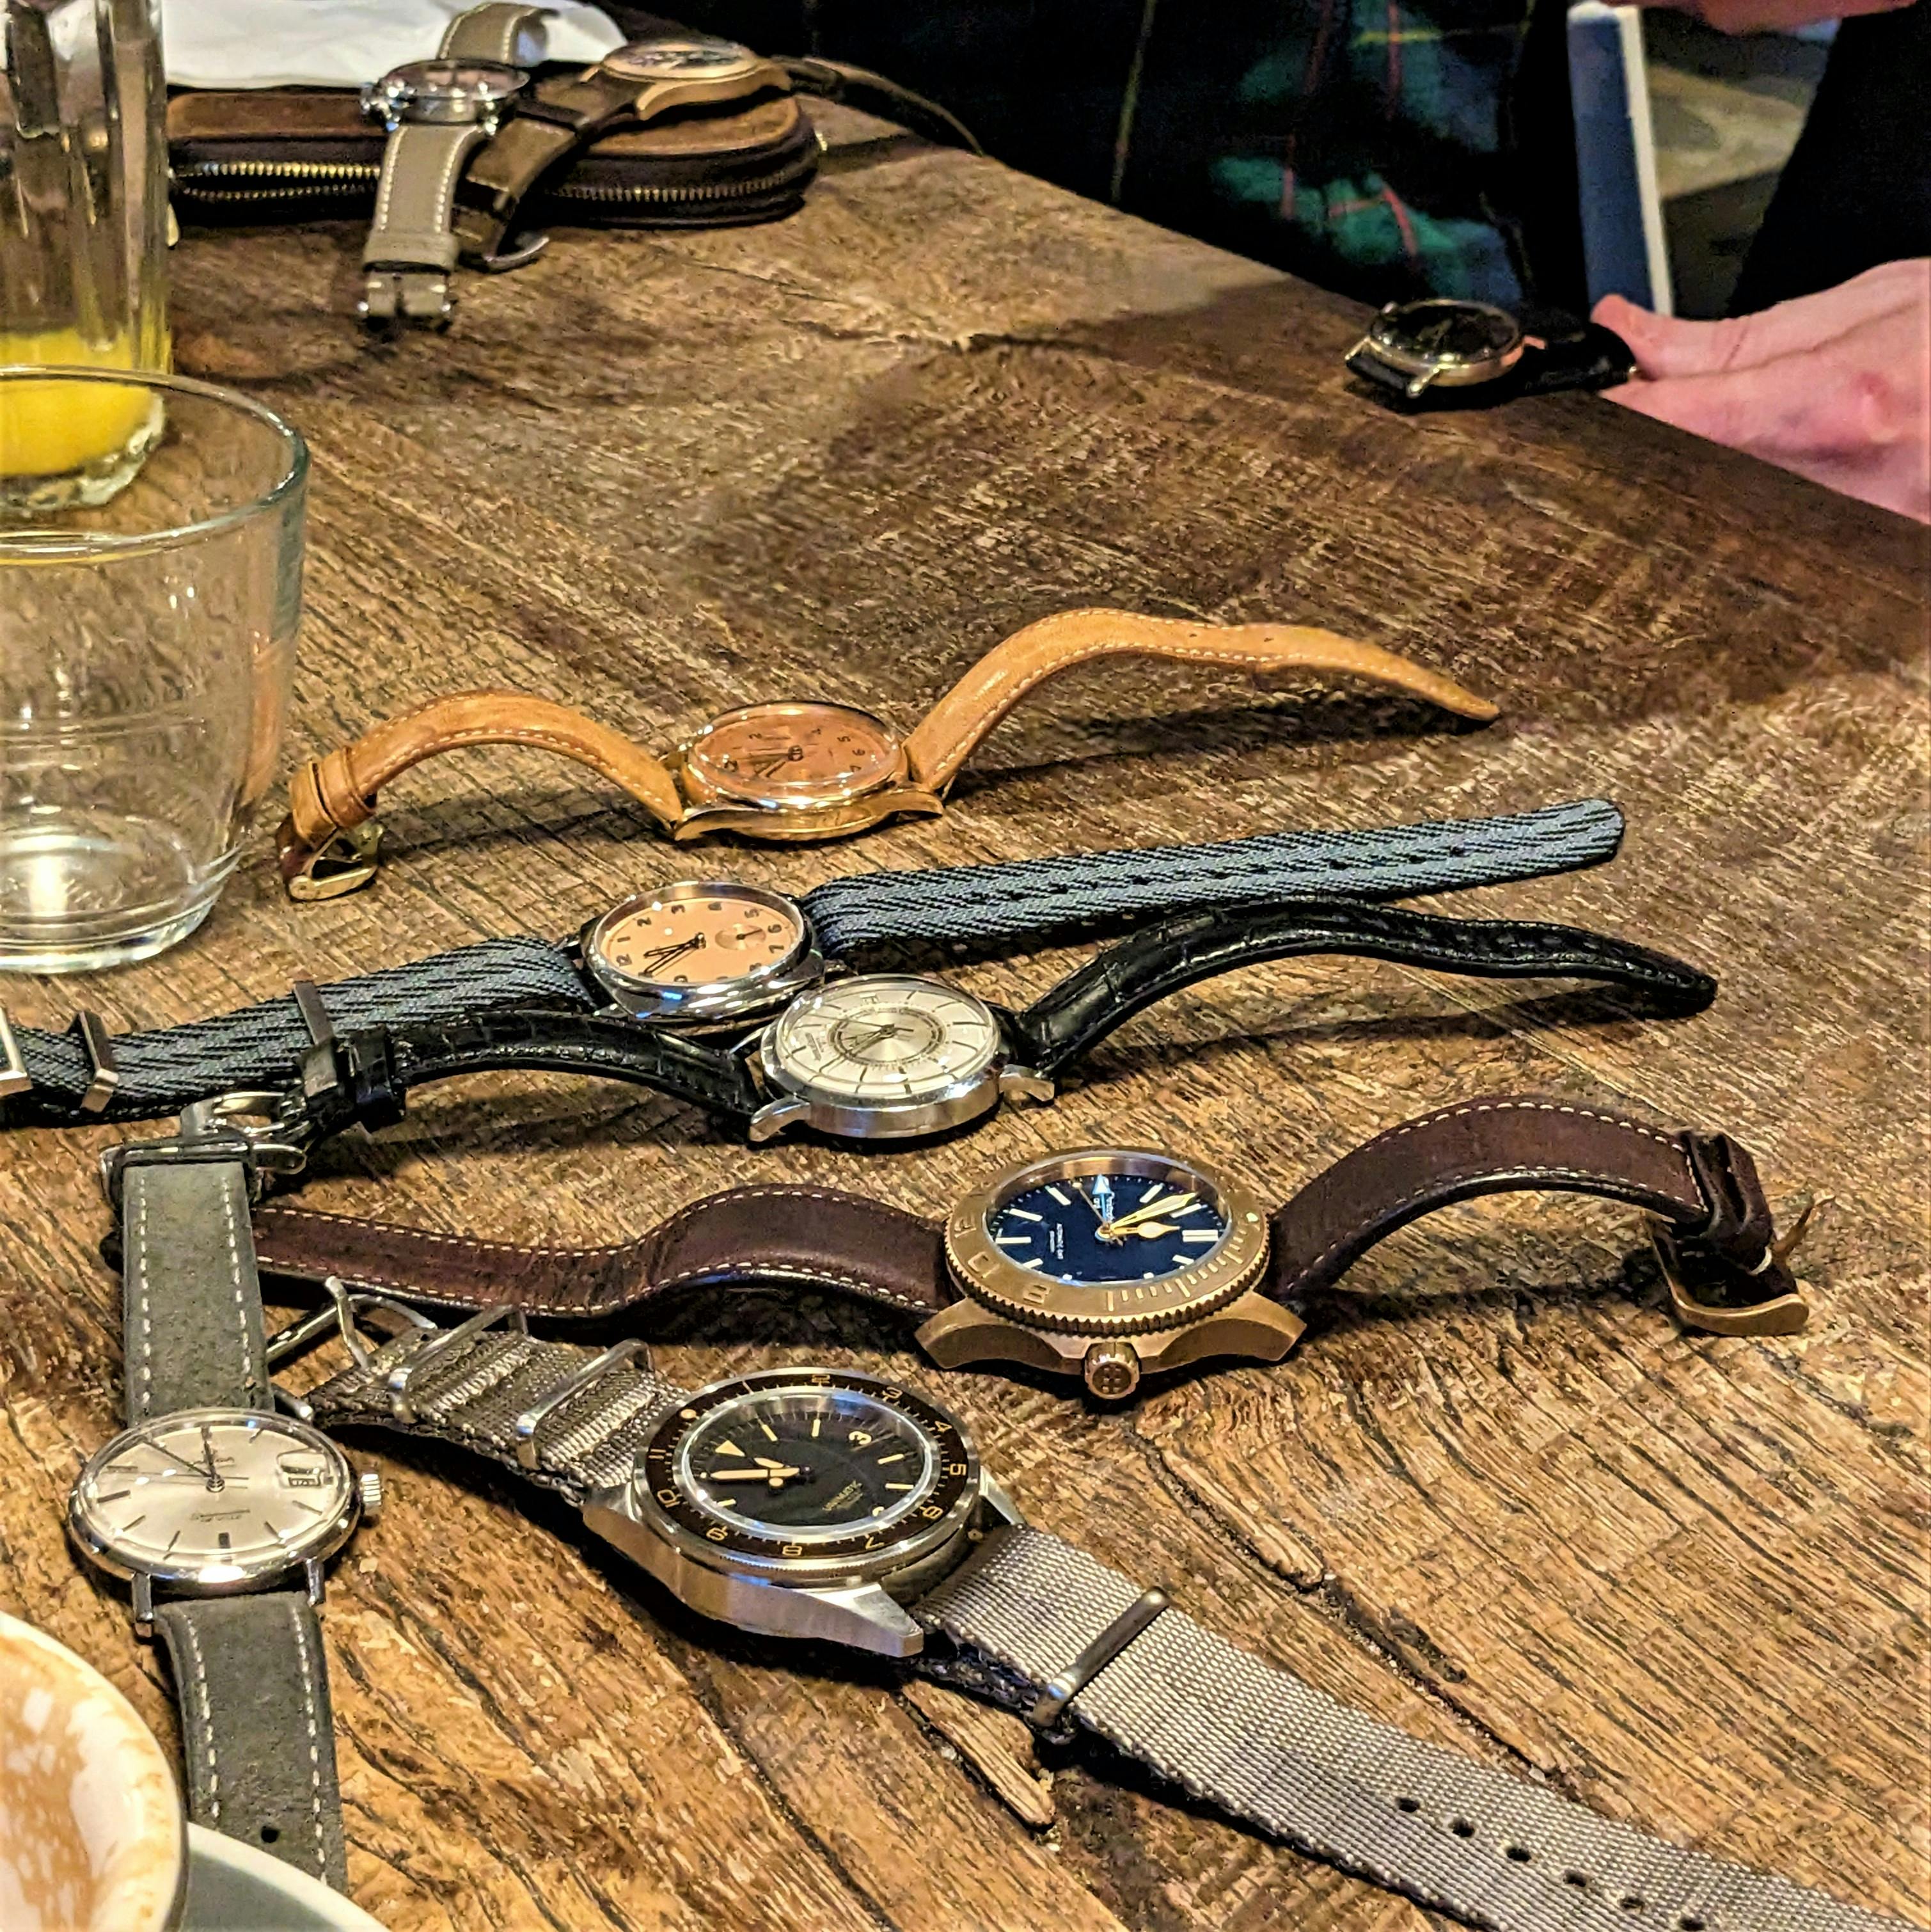 A pile of watches on a brown table featugin watches with differnet cases, coloured dials and straps. 